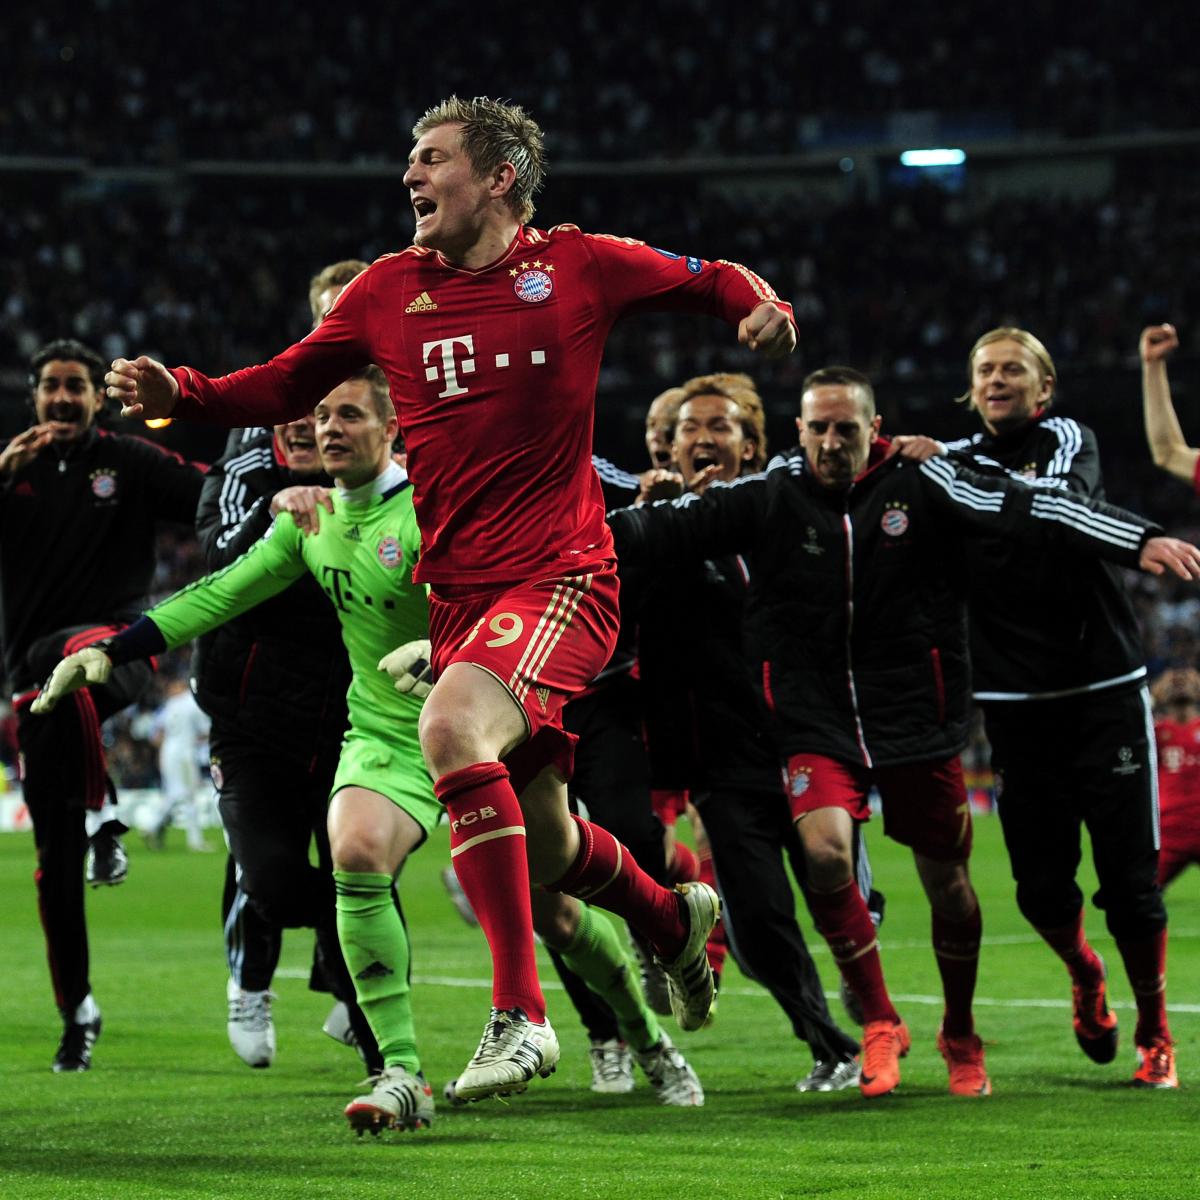 Real Madrid vs. Bayern Munich Highlights: Germans in Driver's Seat for